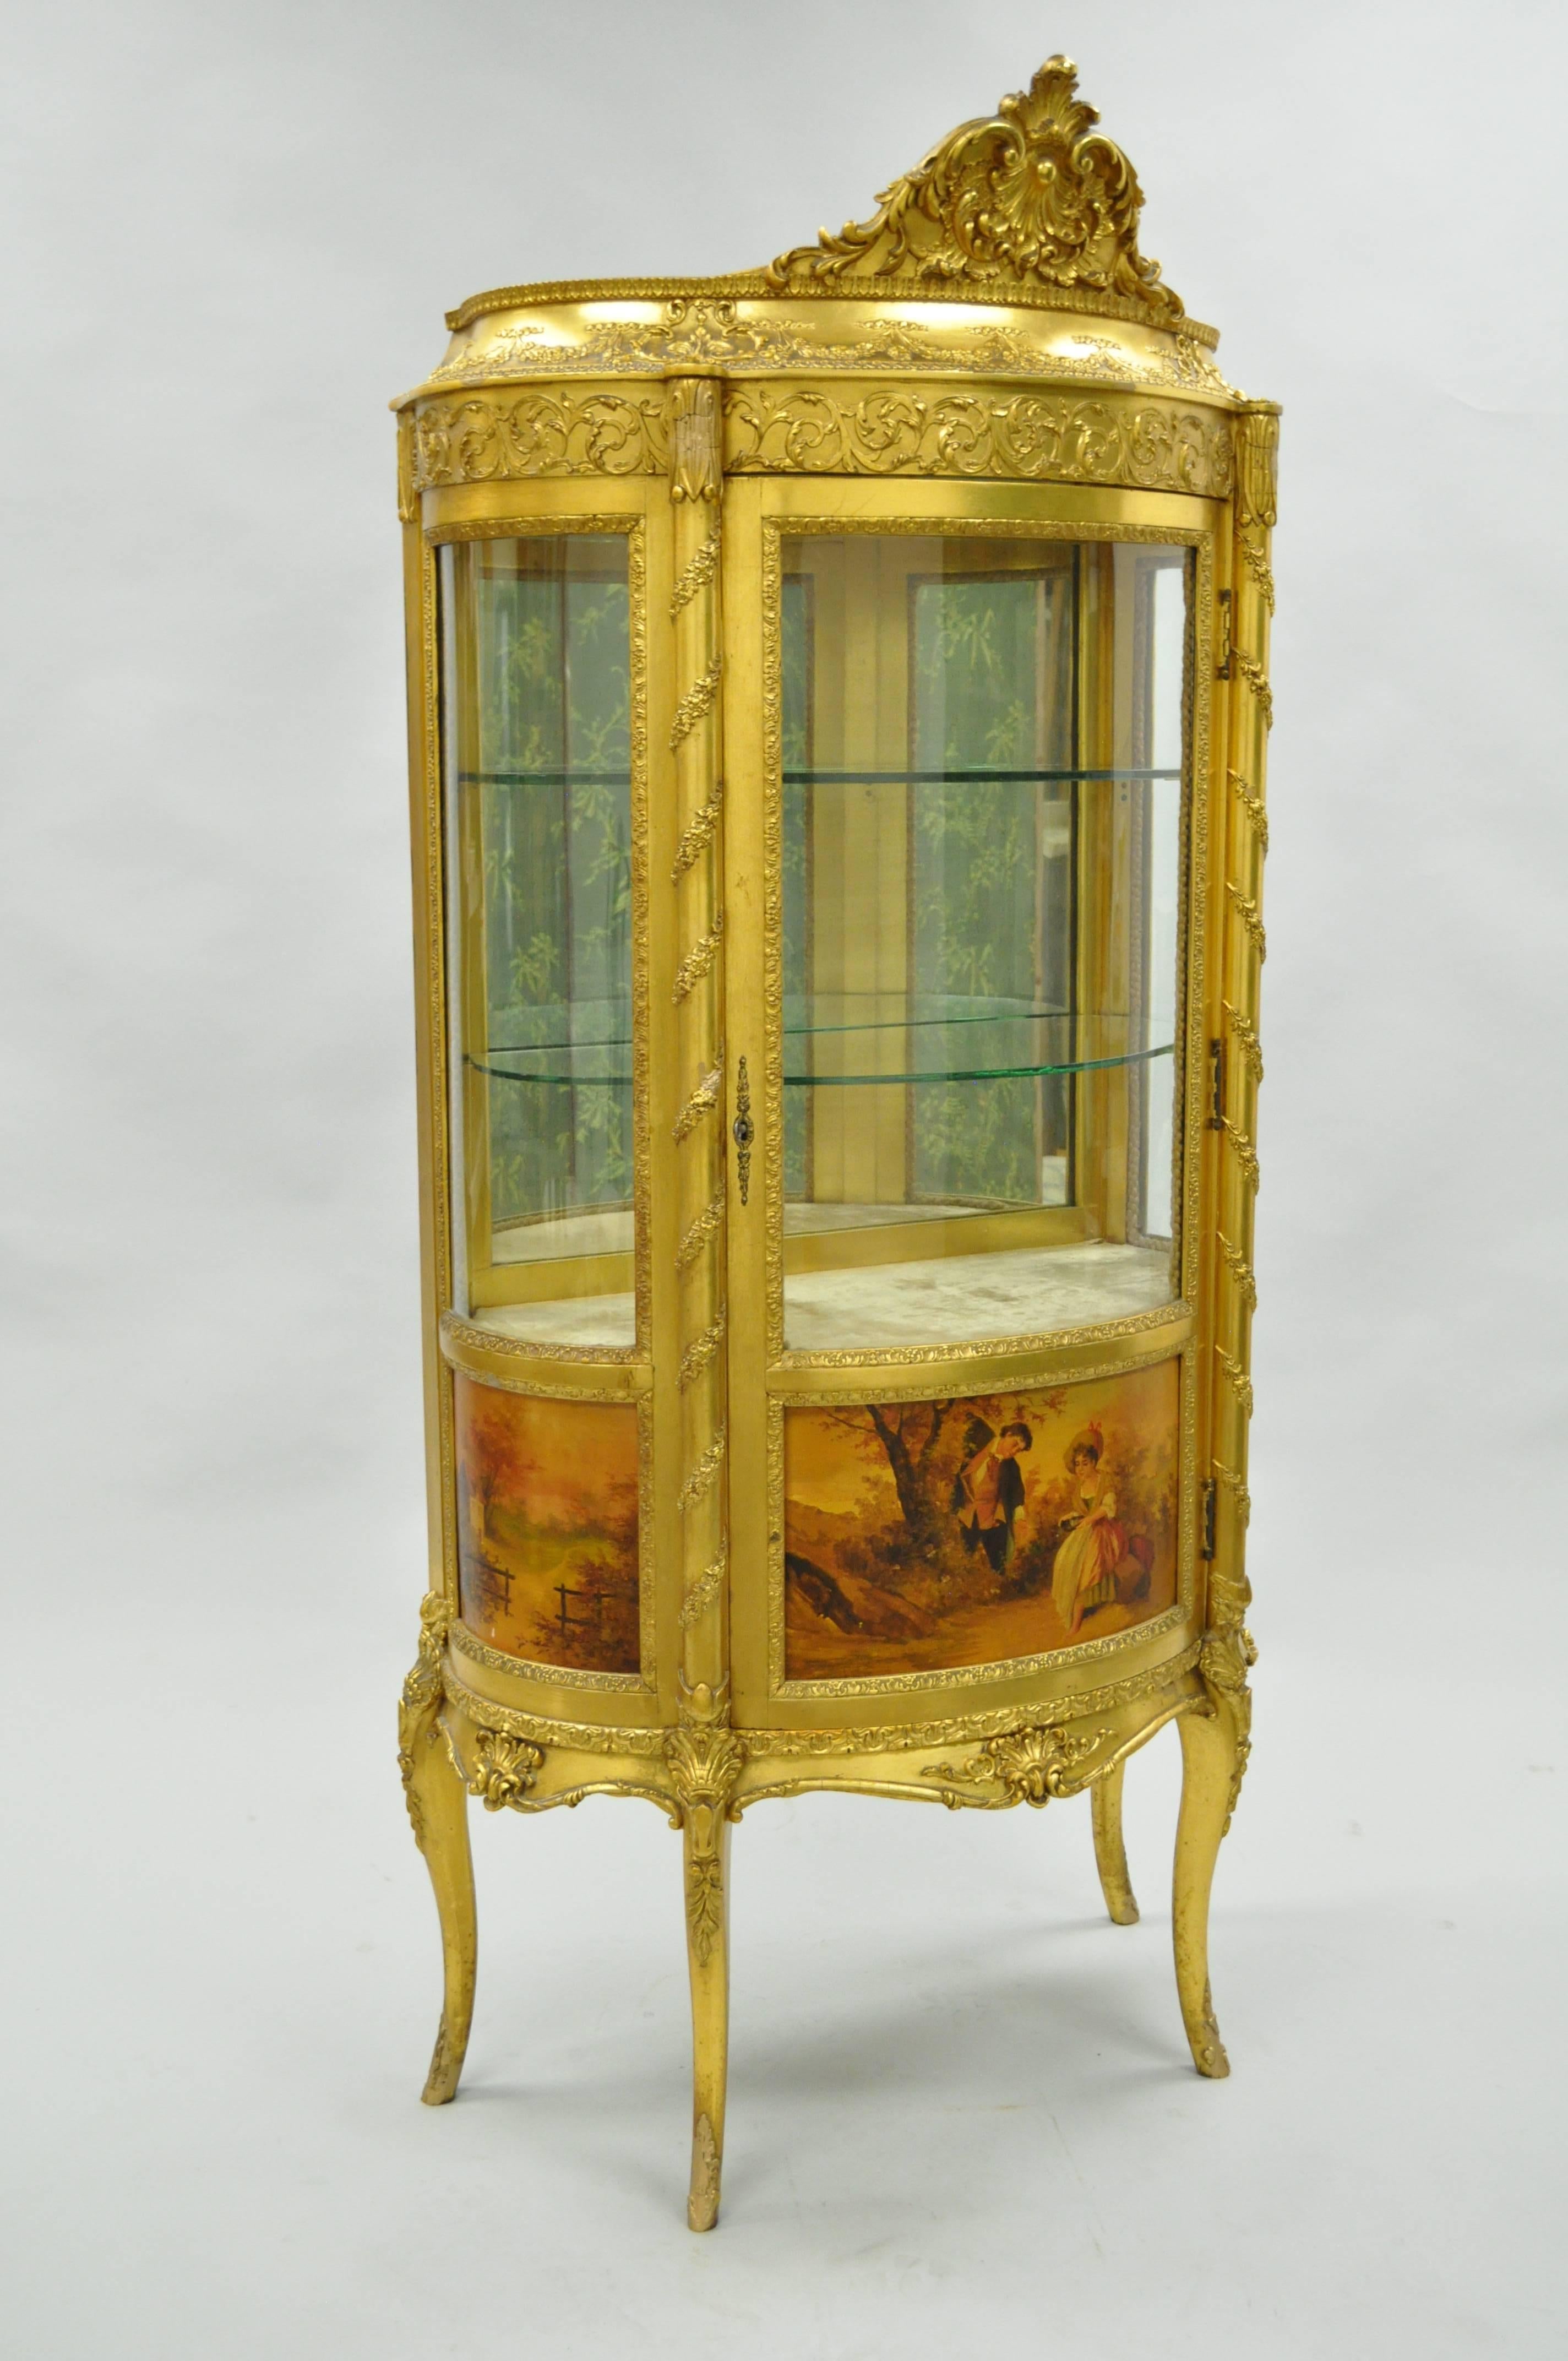 Remarkable Late 19th century French Louis XV style gold giltwood vernis Martin curved glass curio cabinet. The French cabinet, with serpentine top and case, carved with tied ribbons, husks and leafy vines, with mirrored interior and curved glass